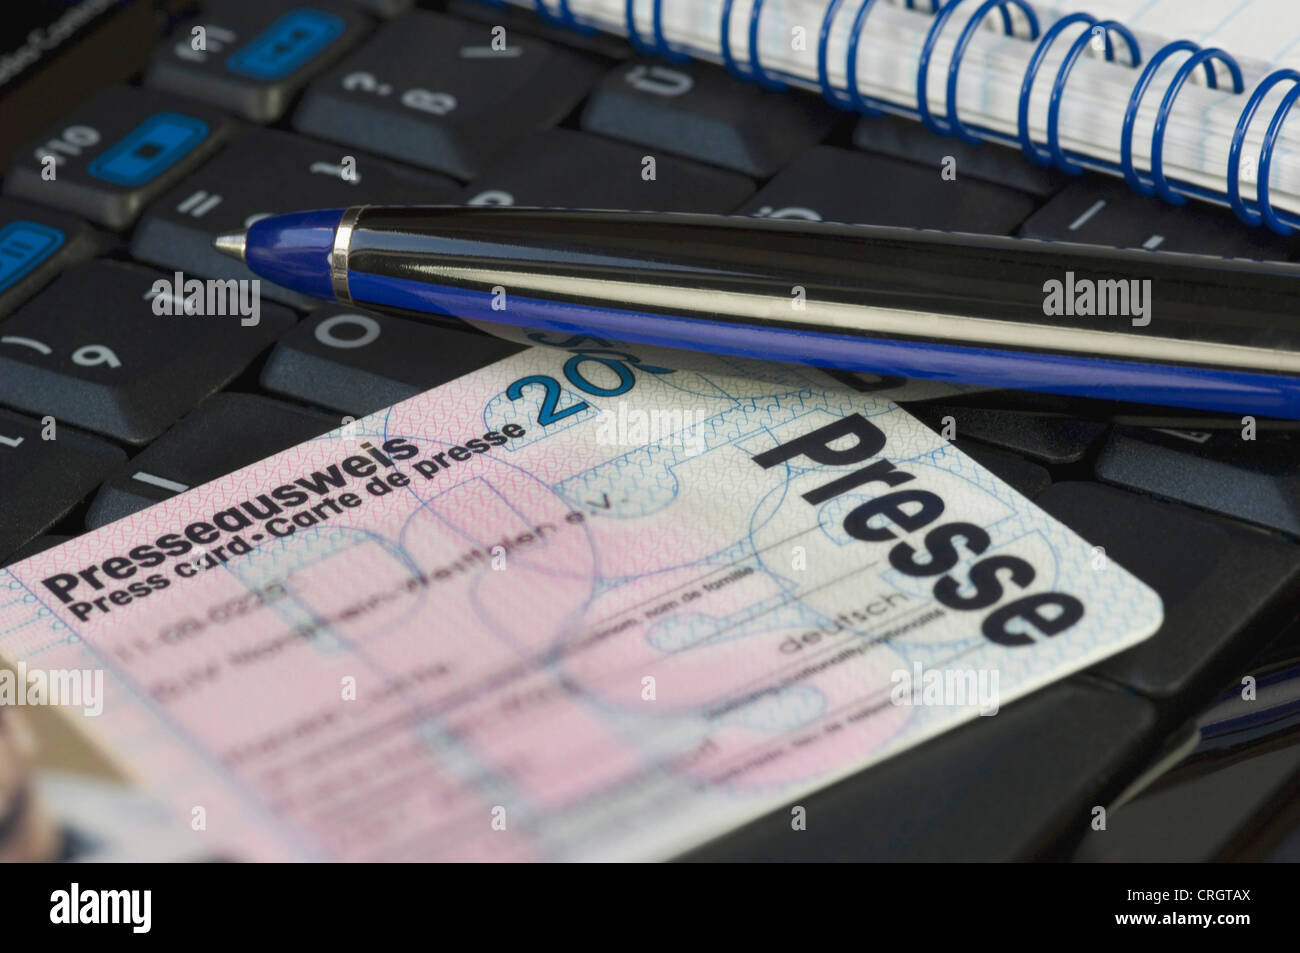 press card, notepad and ball-pen on a computer keyboard Stock Photo